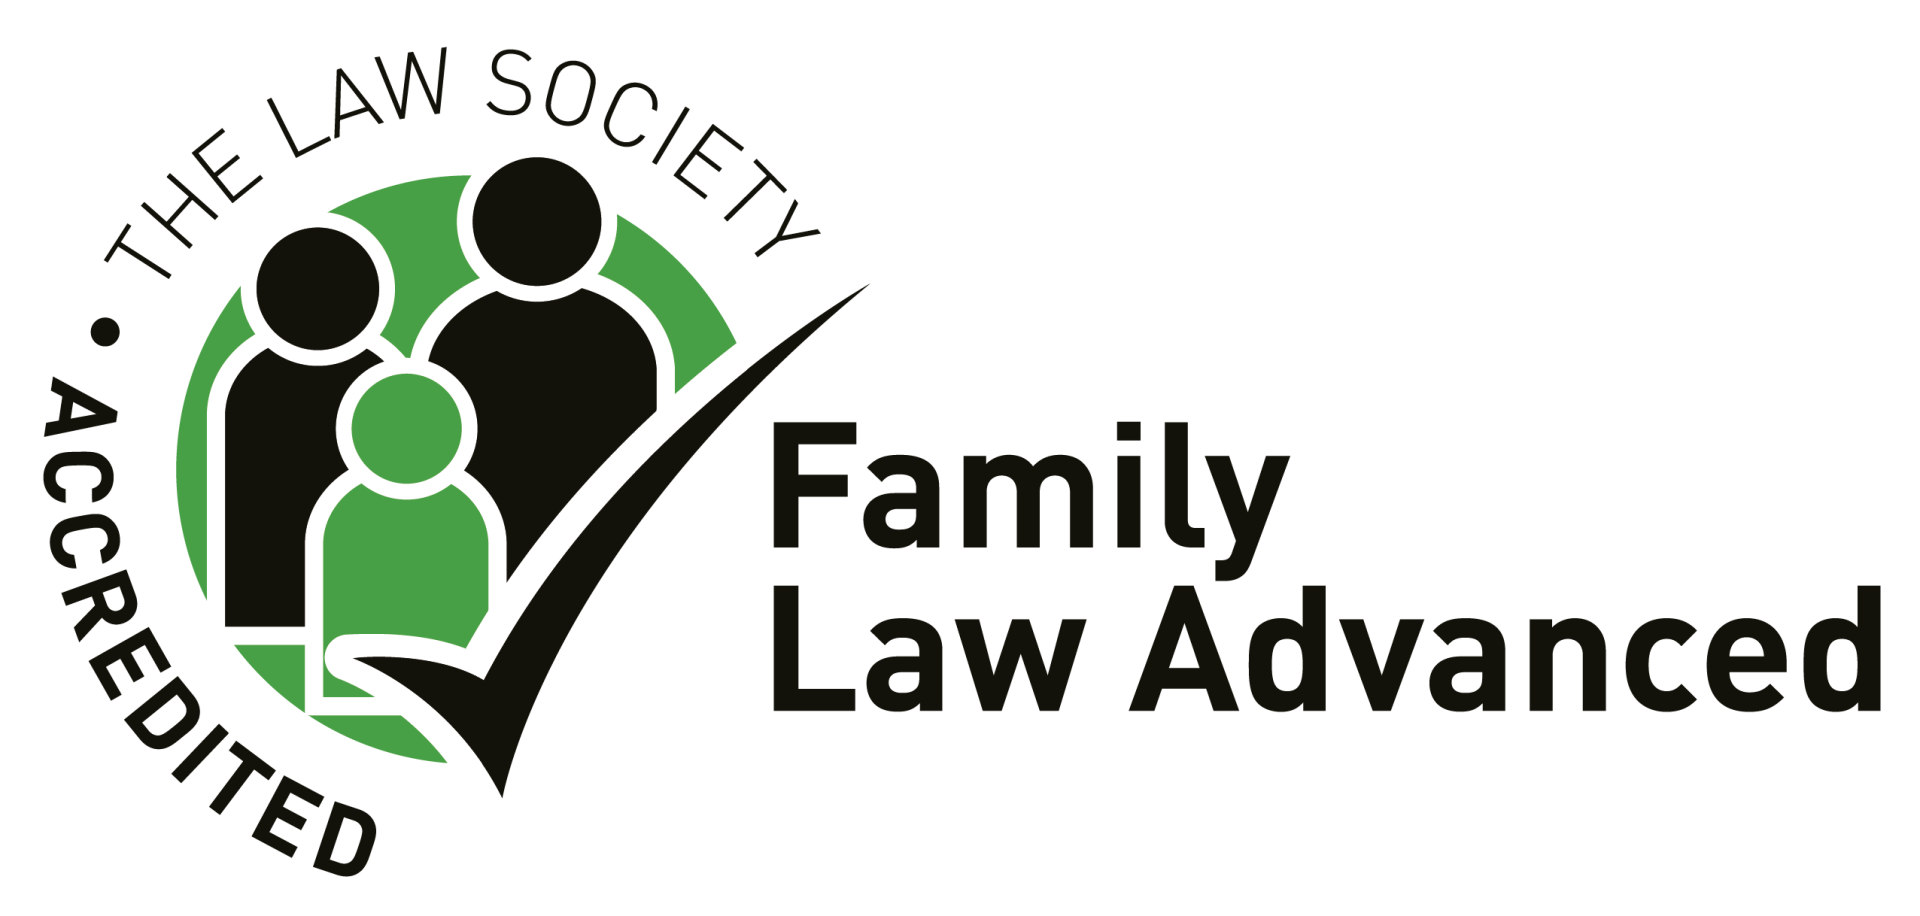 Accredited Family Law Advanced